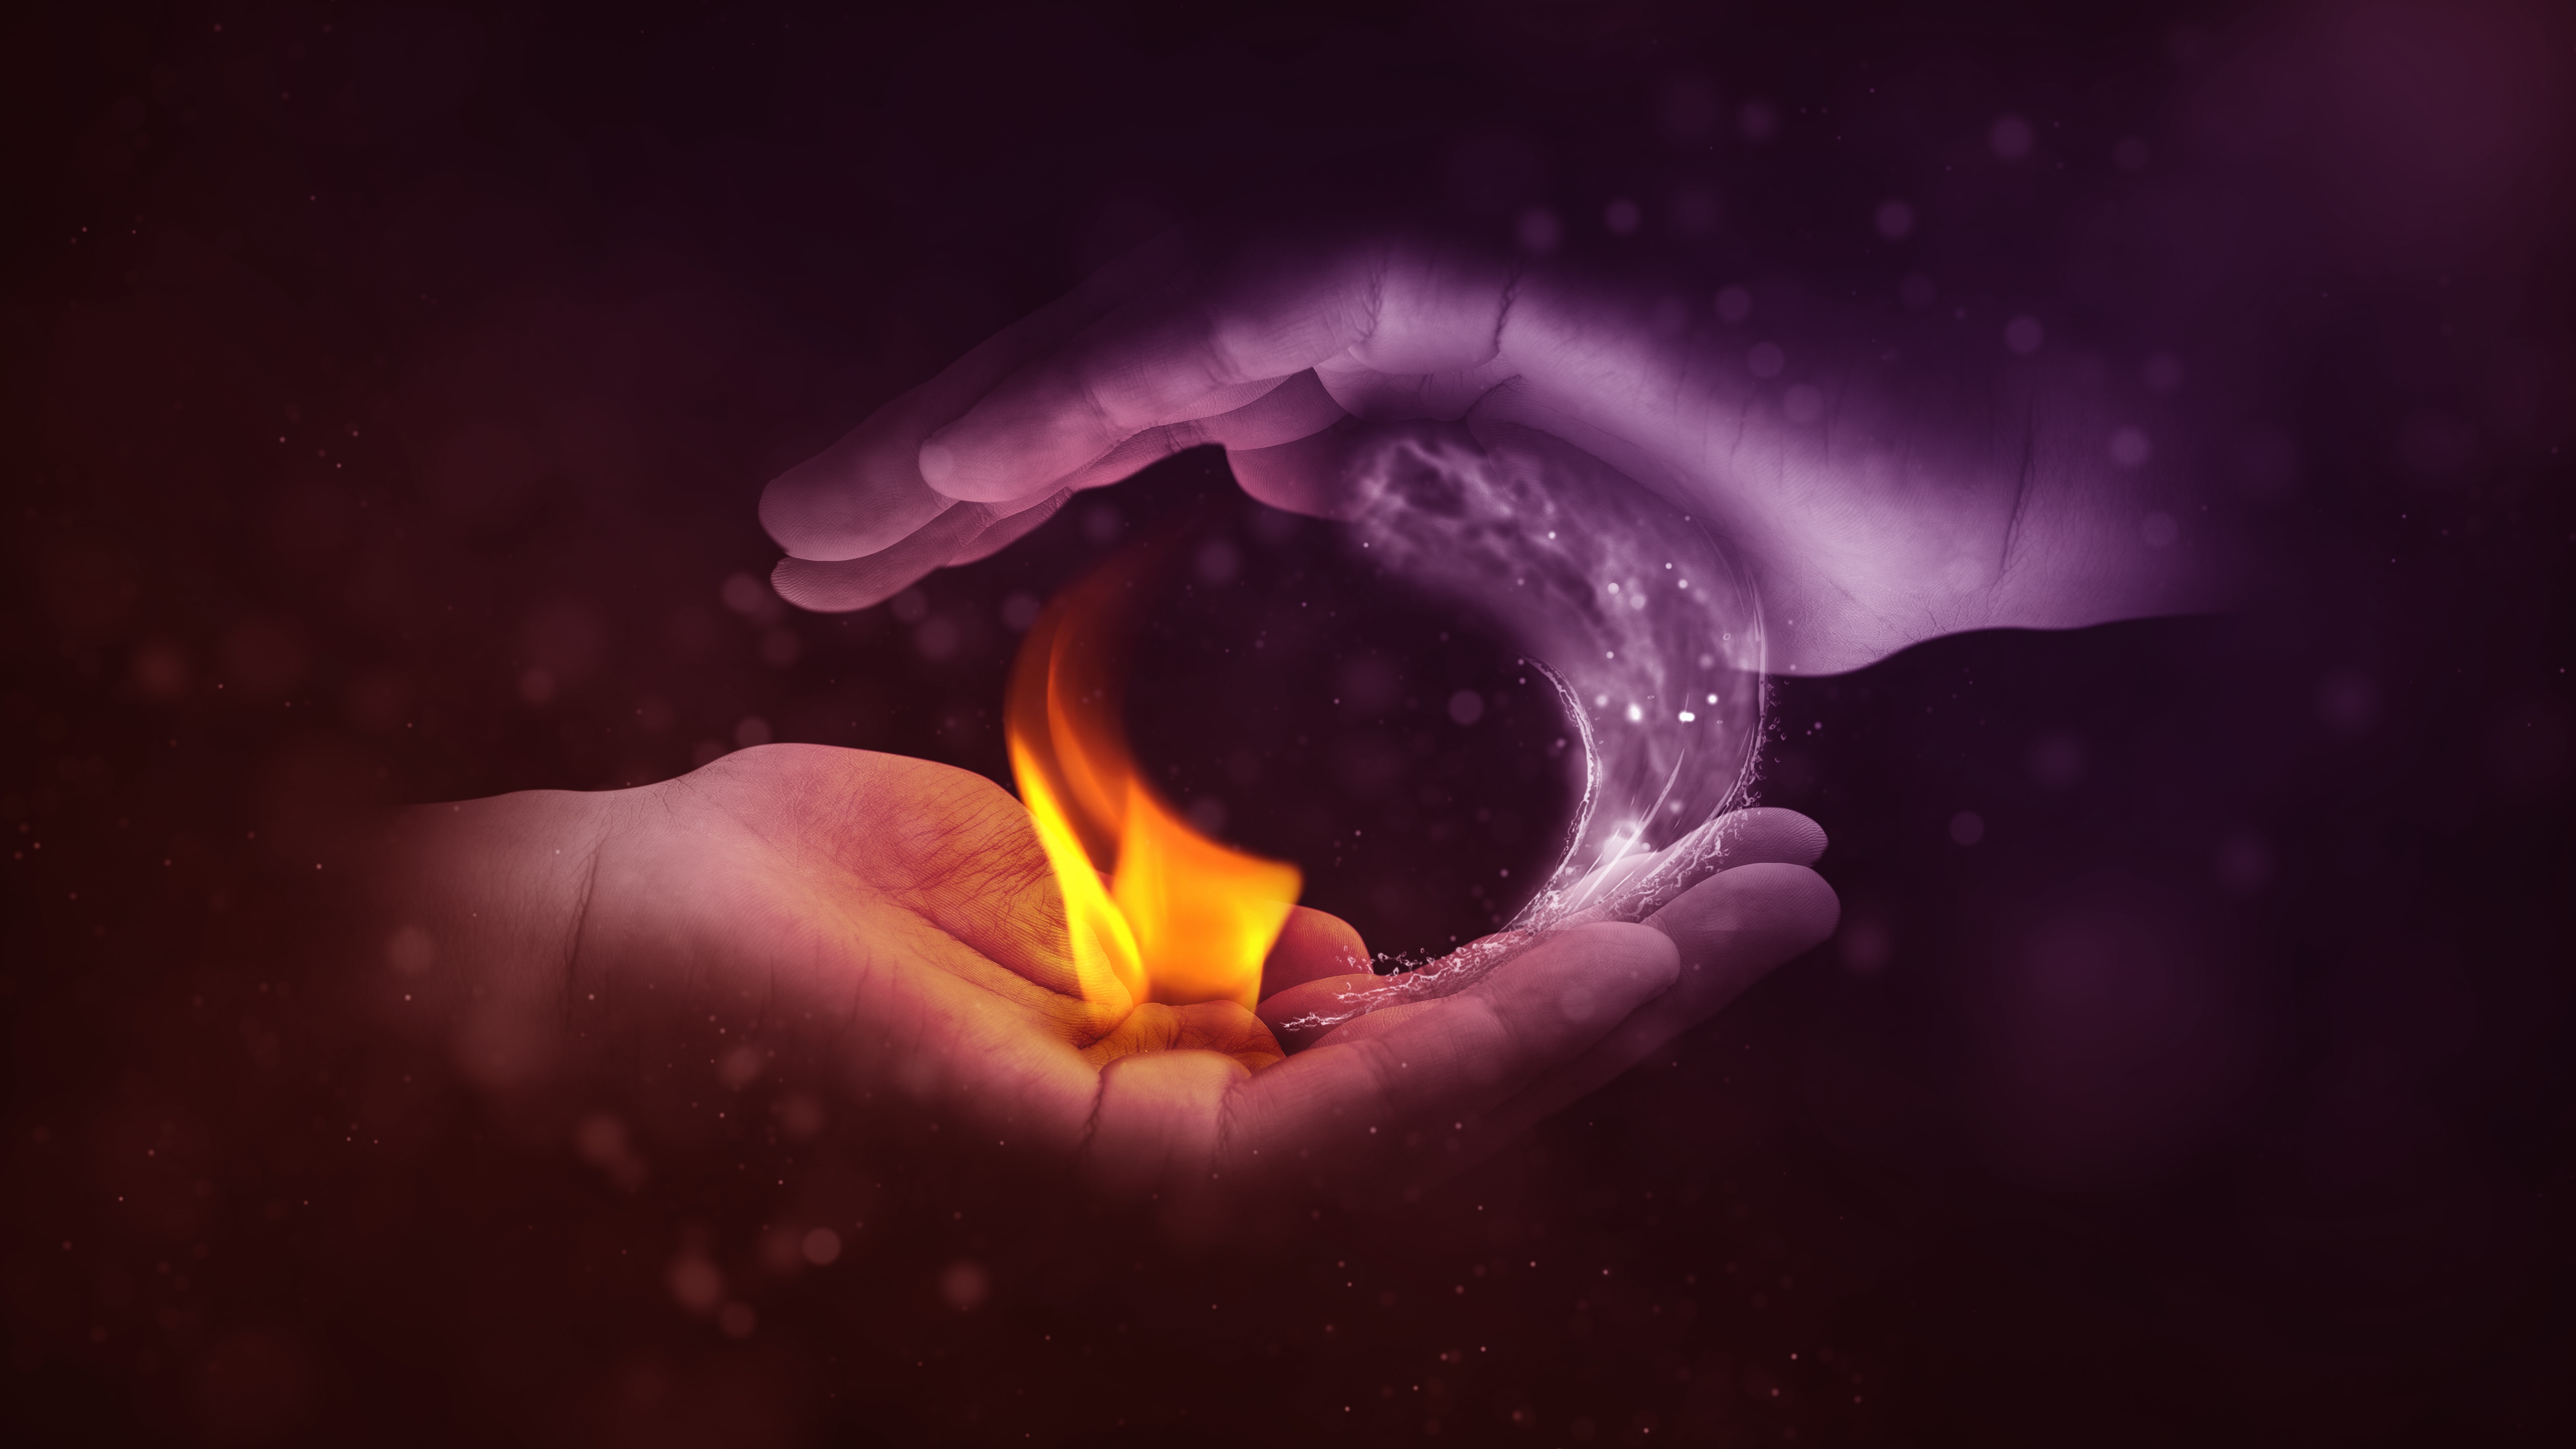 hands, water, fire, miscellanea, miscellaneous, photoshop cell phone wallpapers